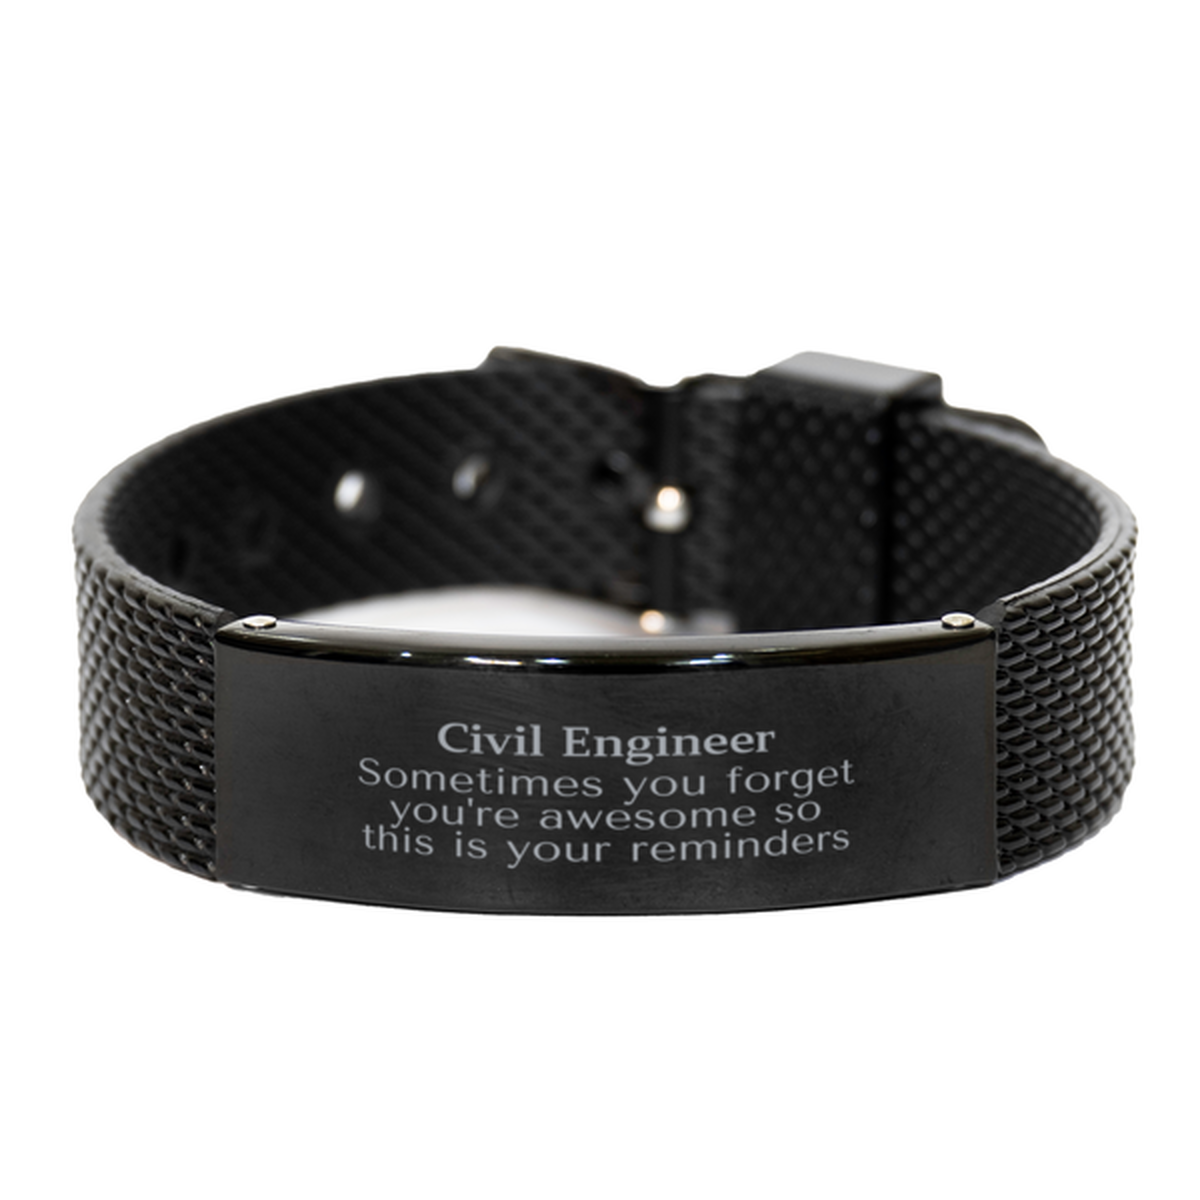 Sentimental Civil Engineer Black Shark Mesh Bracelet, Civil Engineer Sometimes you forget you're awesome so this is your reminders, Graduation Christmas Birthday Gifts for Civil Engineer, Men, Women, Coworkers